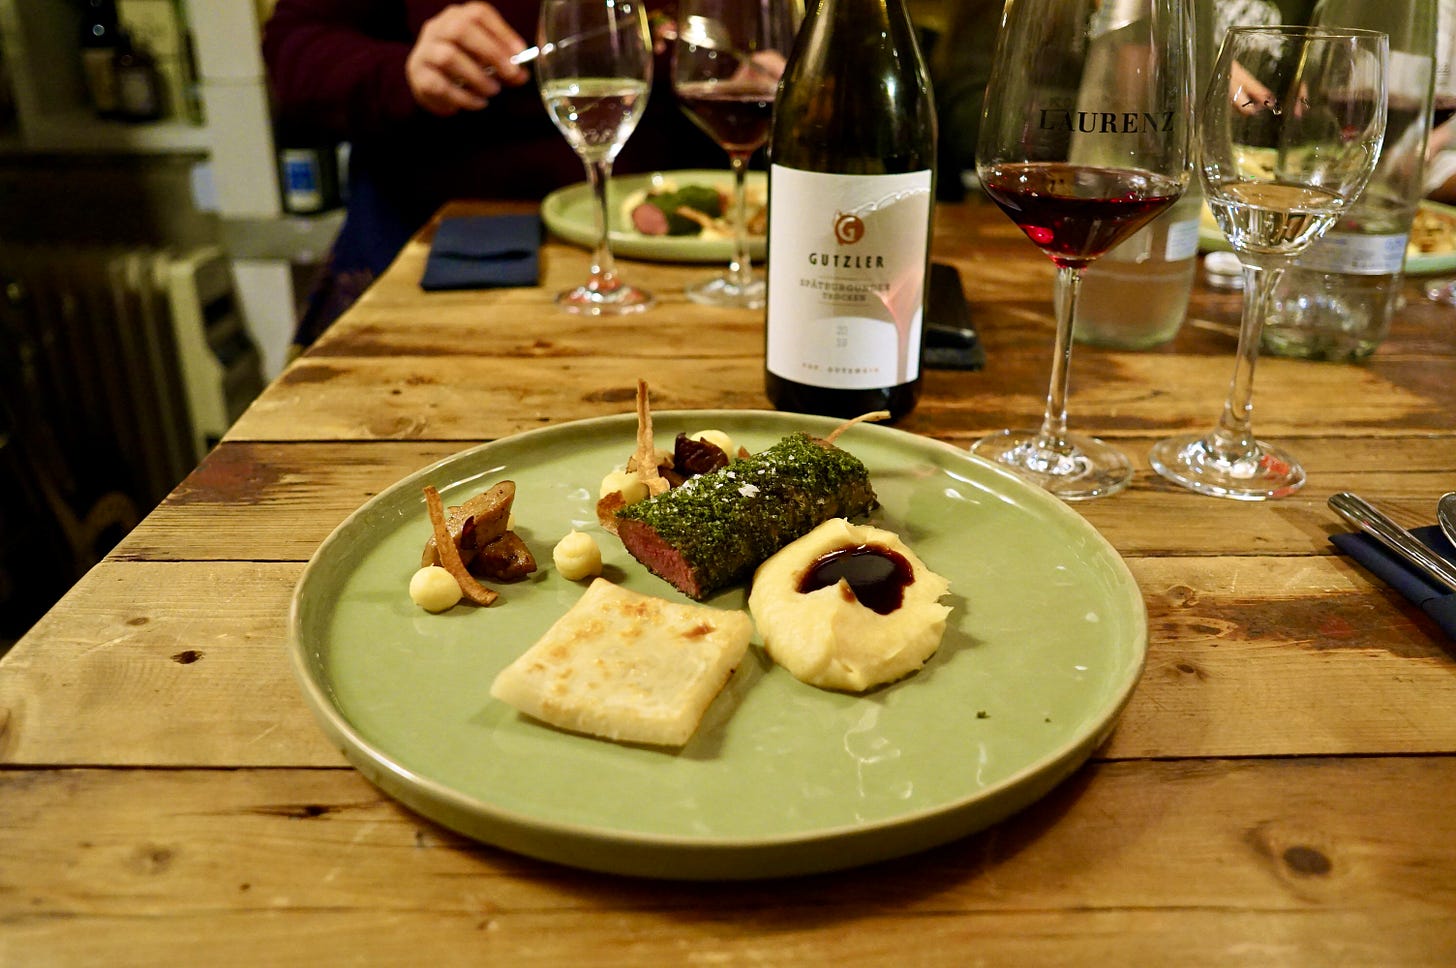 A pale green plate on a wooden table, surrounded by glasses and a bottle of wine. The food on the plate - venison and vegetables - is very neatly arranged.